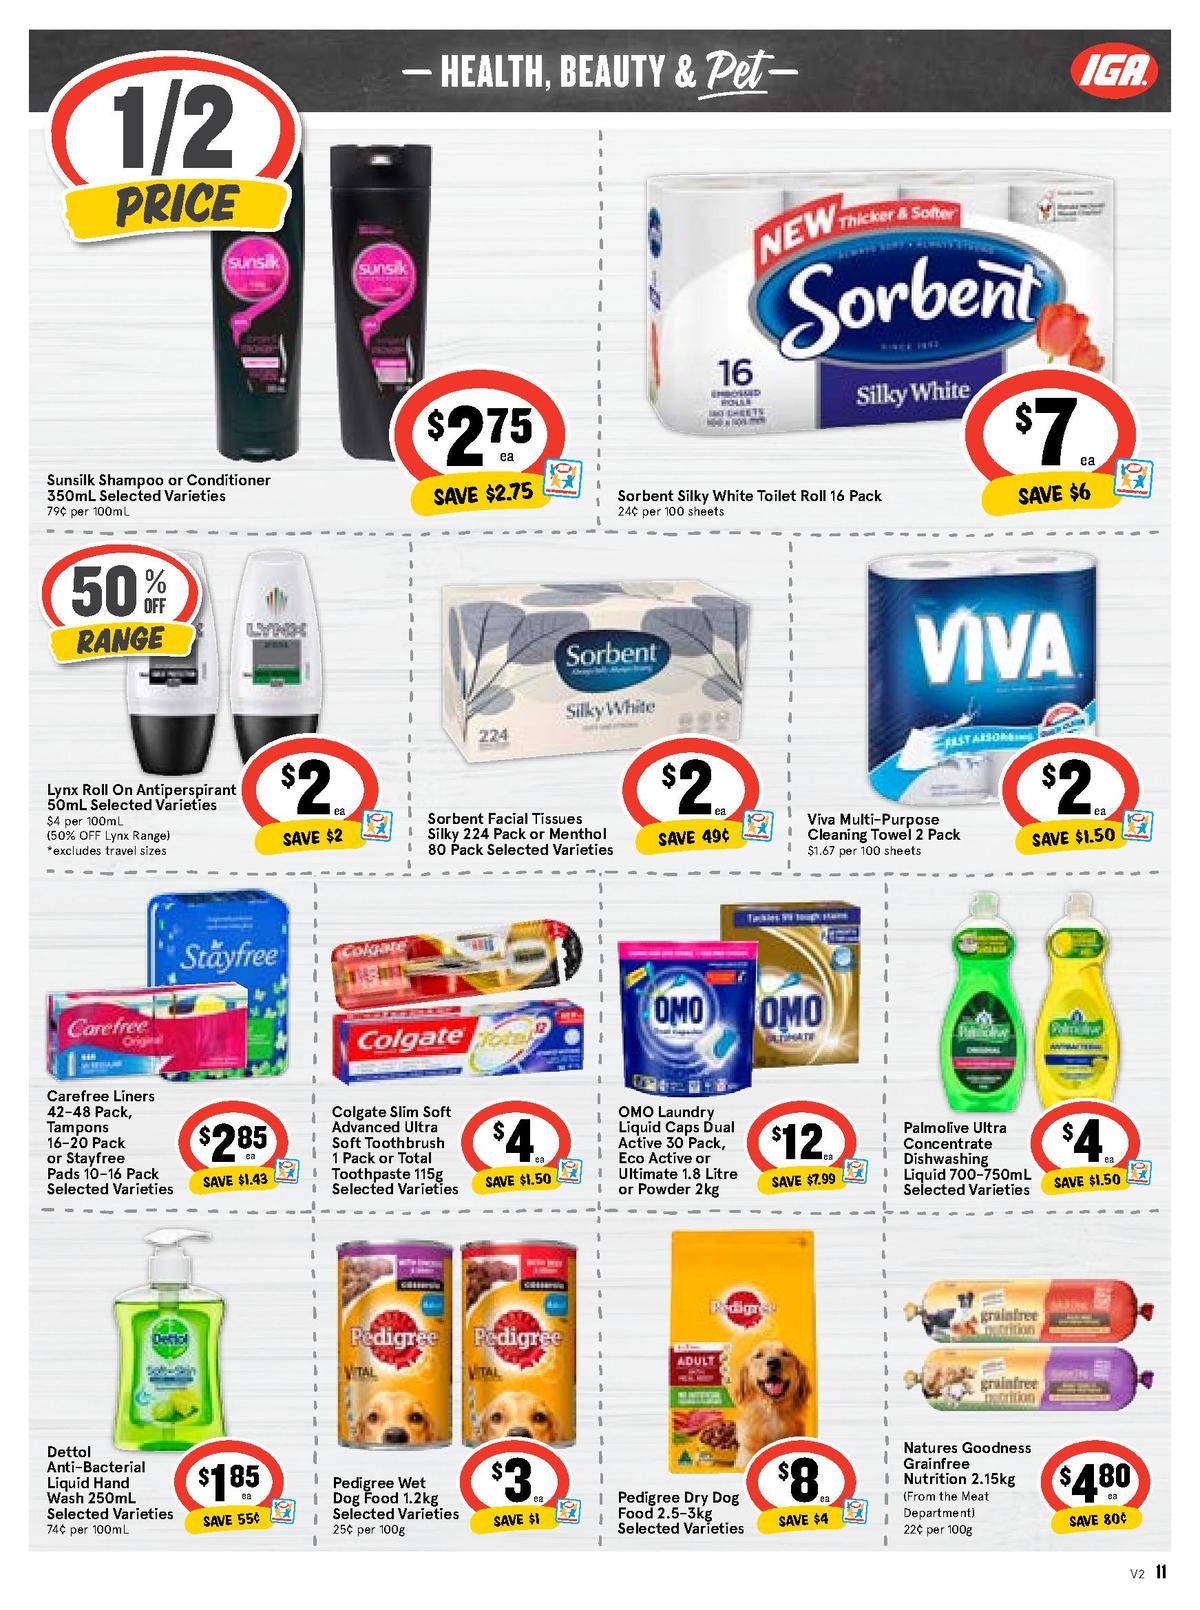 IGA Catalogues from 12 June